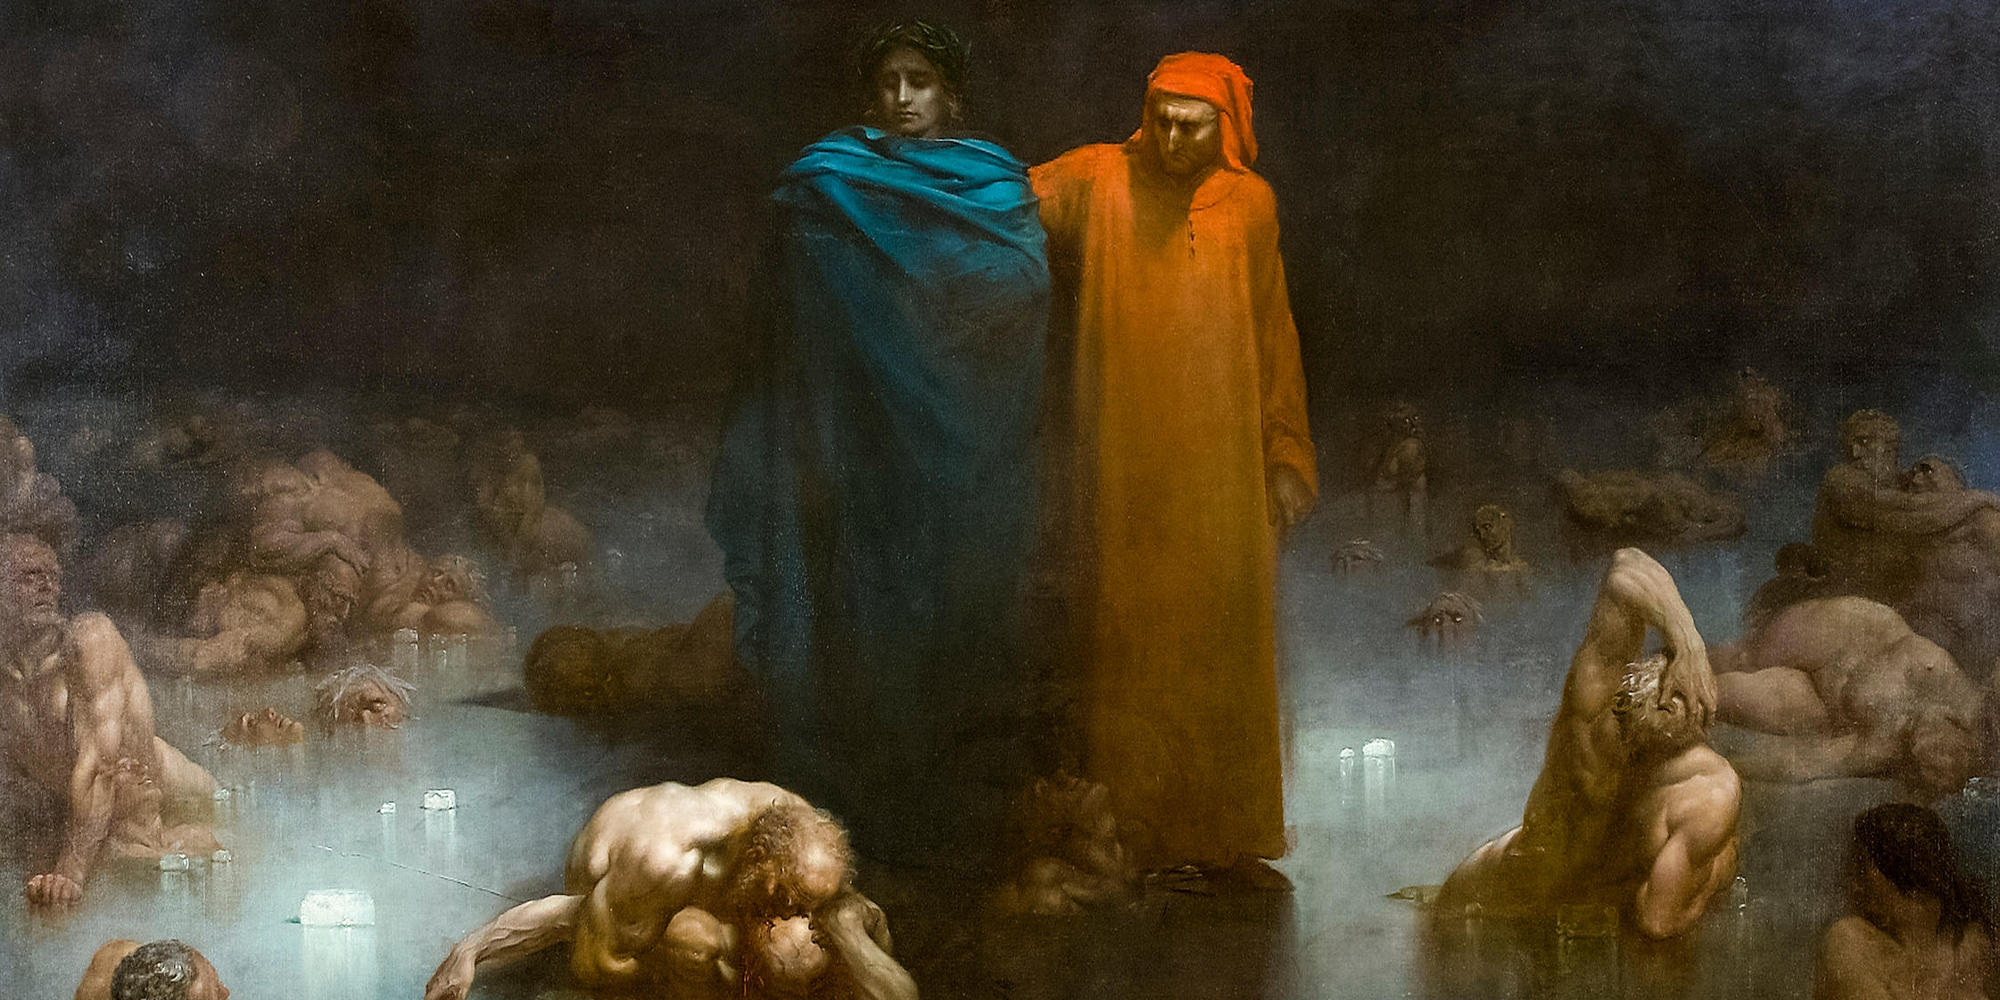 Gustave Dore, Dante and Virgil in the Ninth Circle of Hell, Divine Comedy painting, 1861